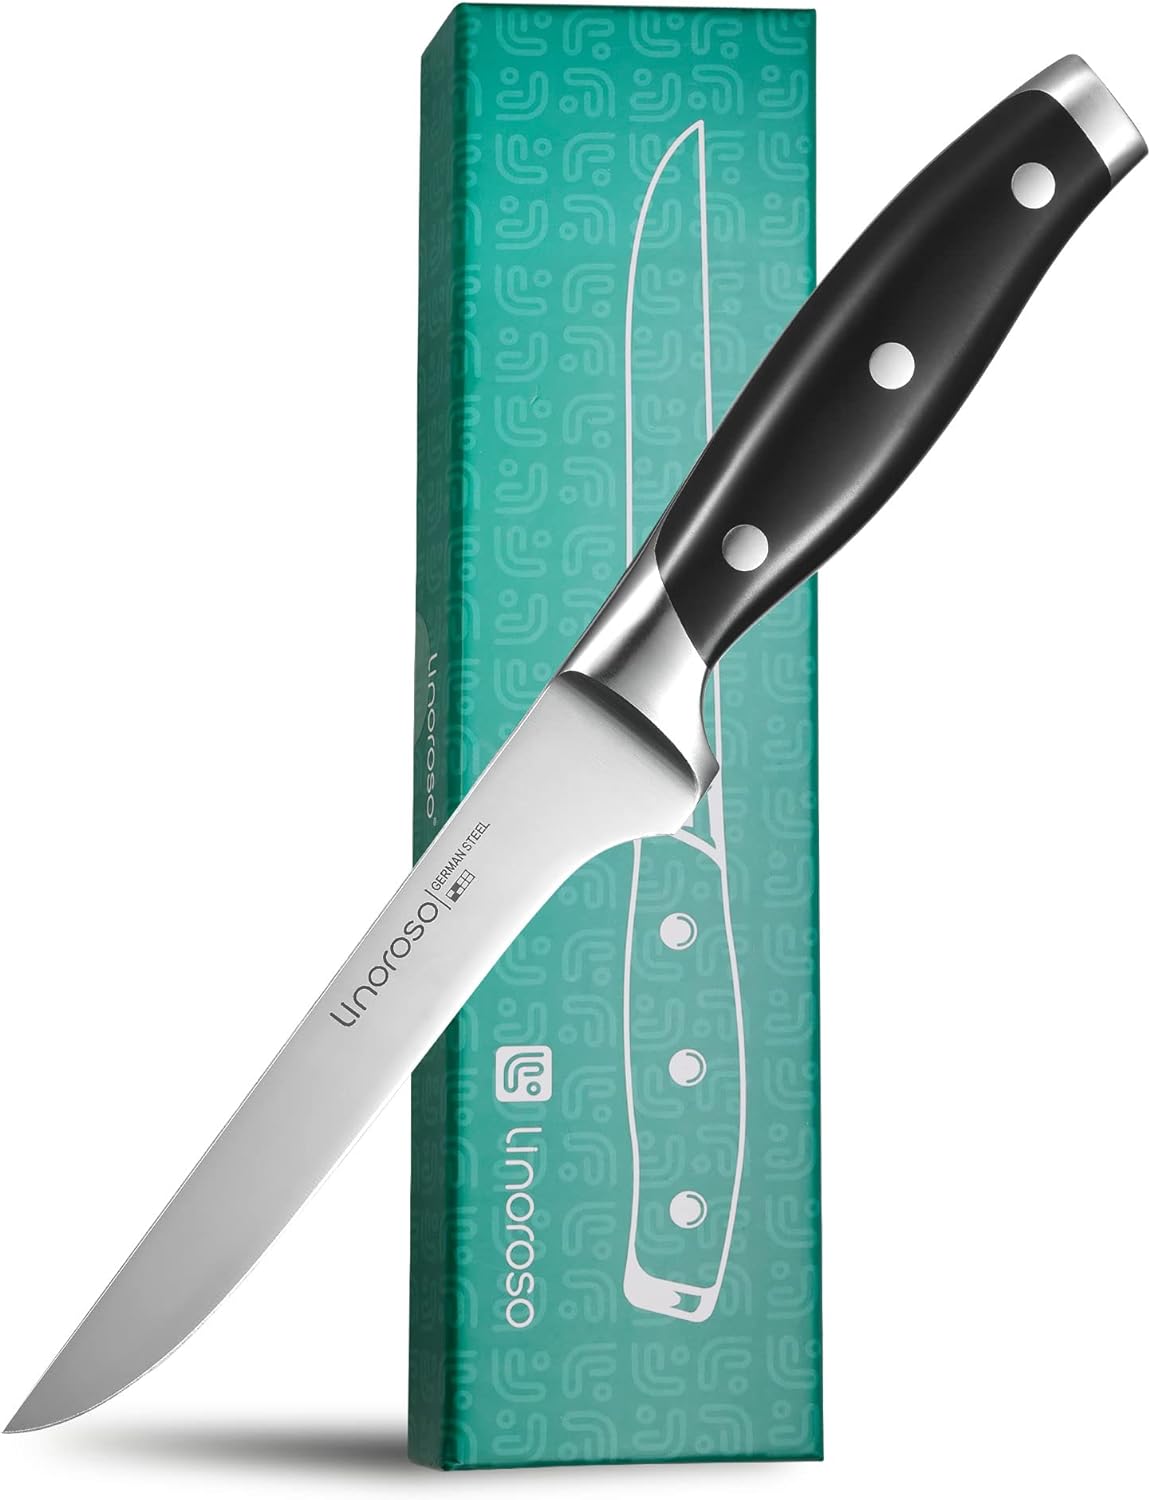 KD Kitchen Knife Sharp German Stainless Steel with Gift Box